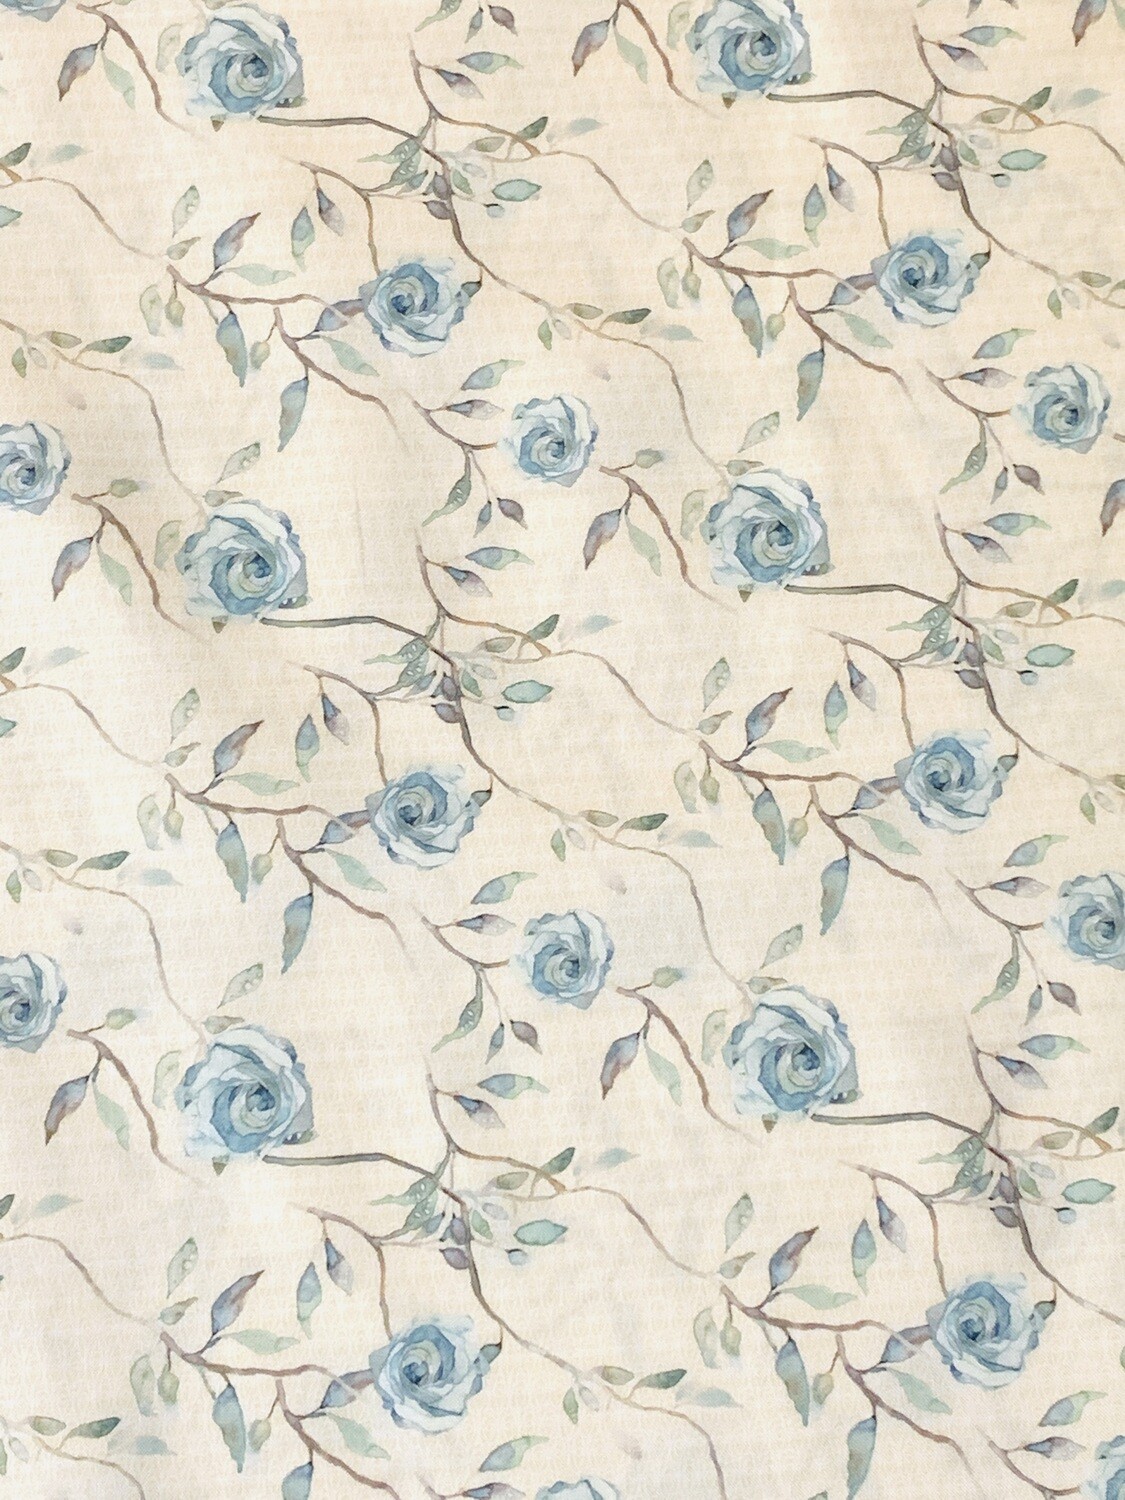 Bloom Beautiful, Roses | Quilting Cotton | 112cm wide